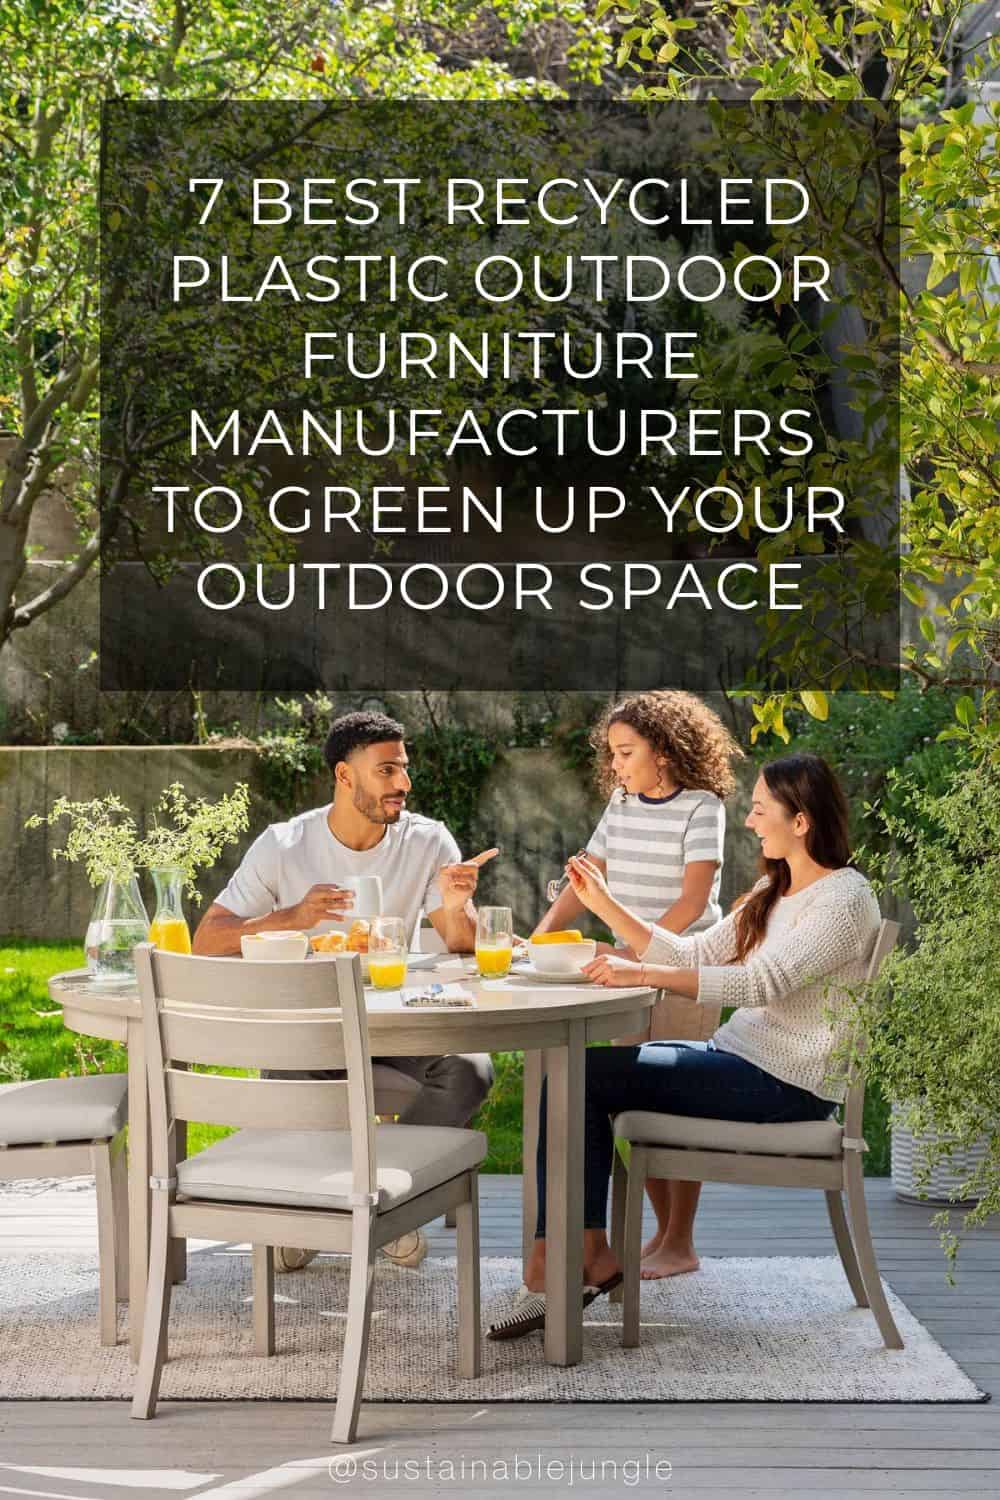 7 Best Recycled Plastic Outdoor Furniture Manufacturers to Green Up Your Outdoor Space Image by Yardbird #recycledplasticoutdoorfurniture #bestrecycledplasticfurniture #outdoorfurnituremadefromrecycledplastic #recycledplasticpatiofurniture #recycledpatiofurniture #sustainablejungle